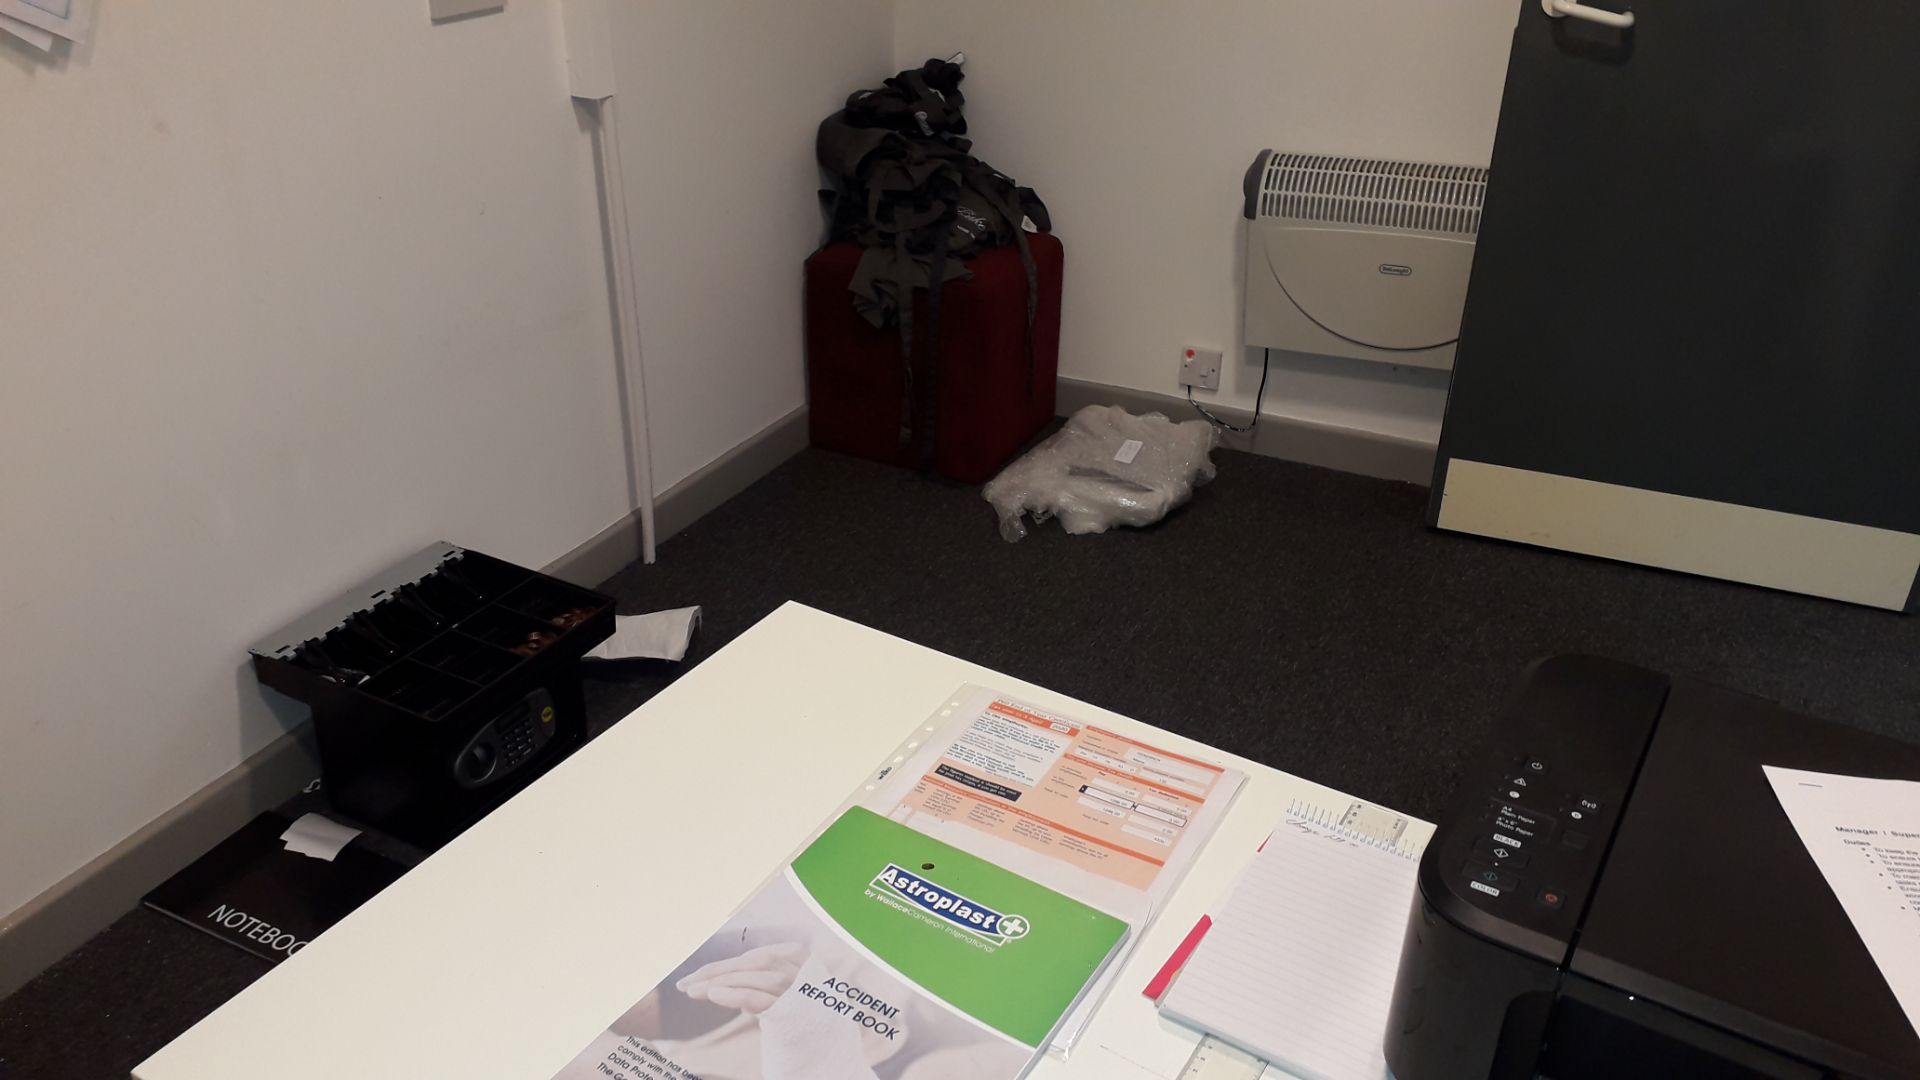 Contents of office to include white desk and swive - Image 3 of 4